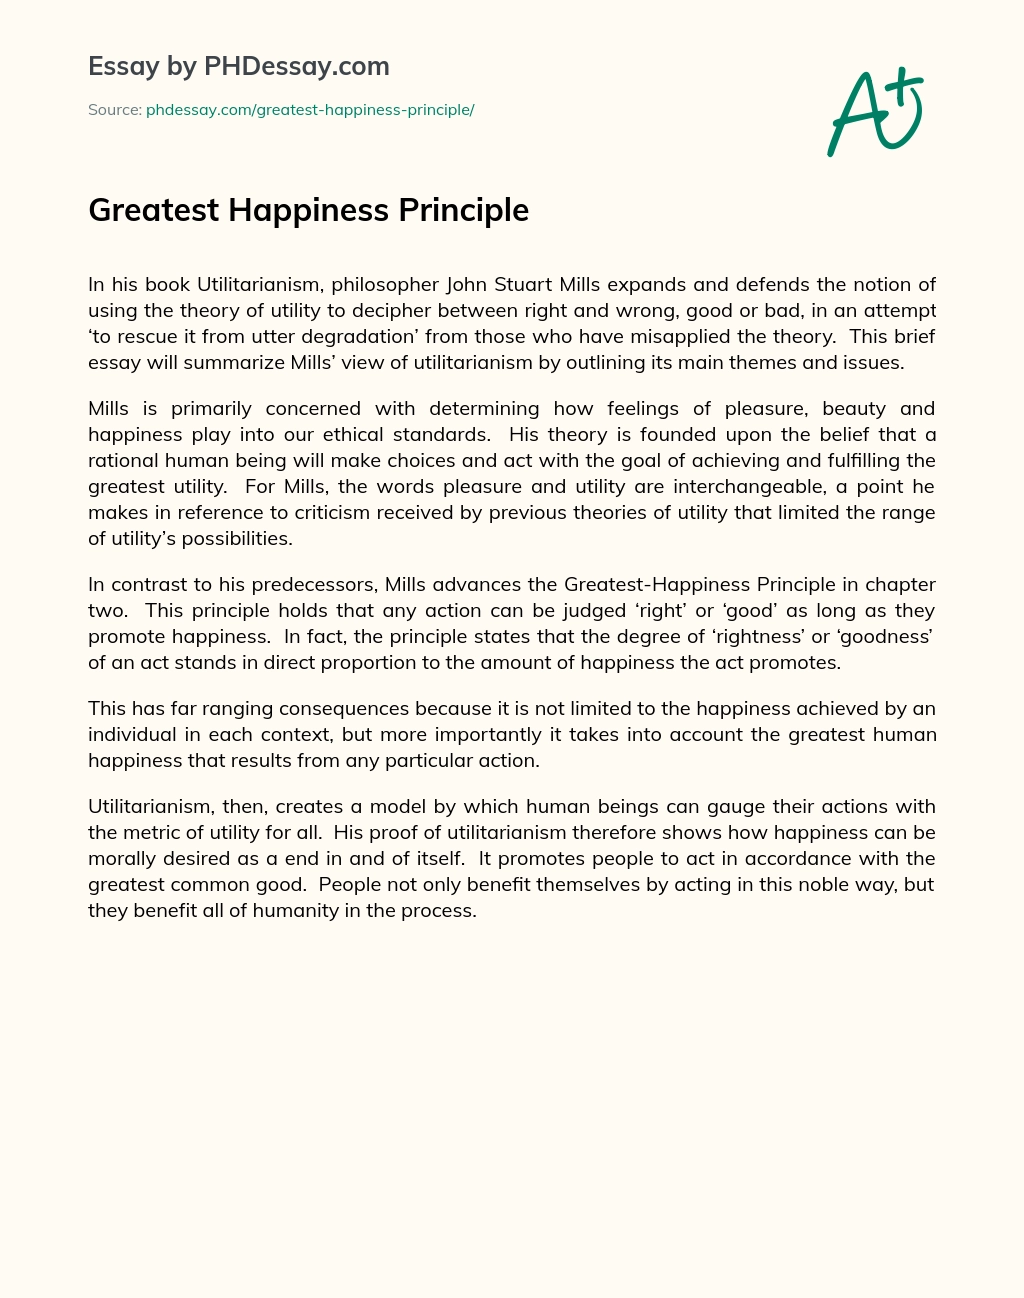 principle of greatest happiness